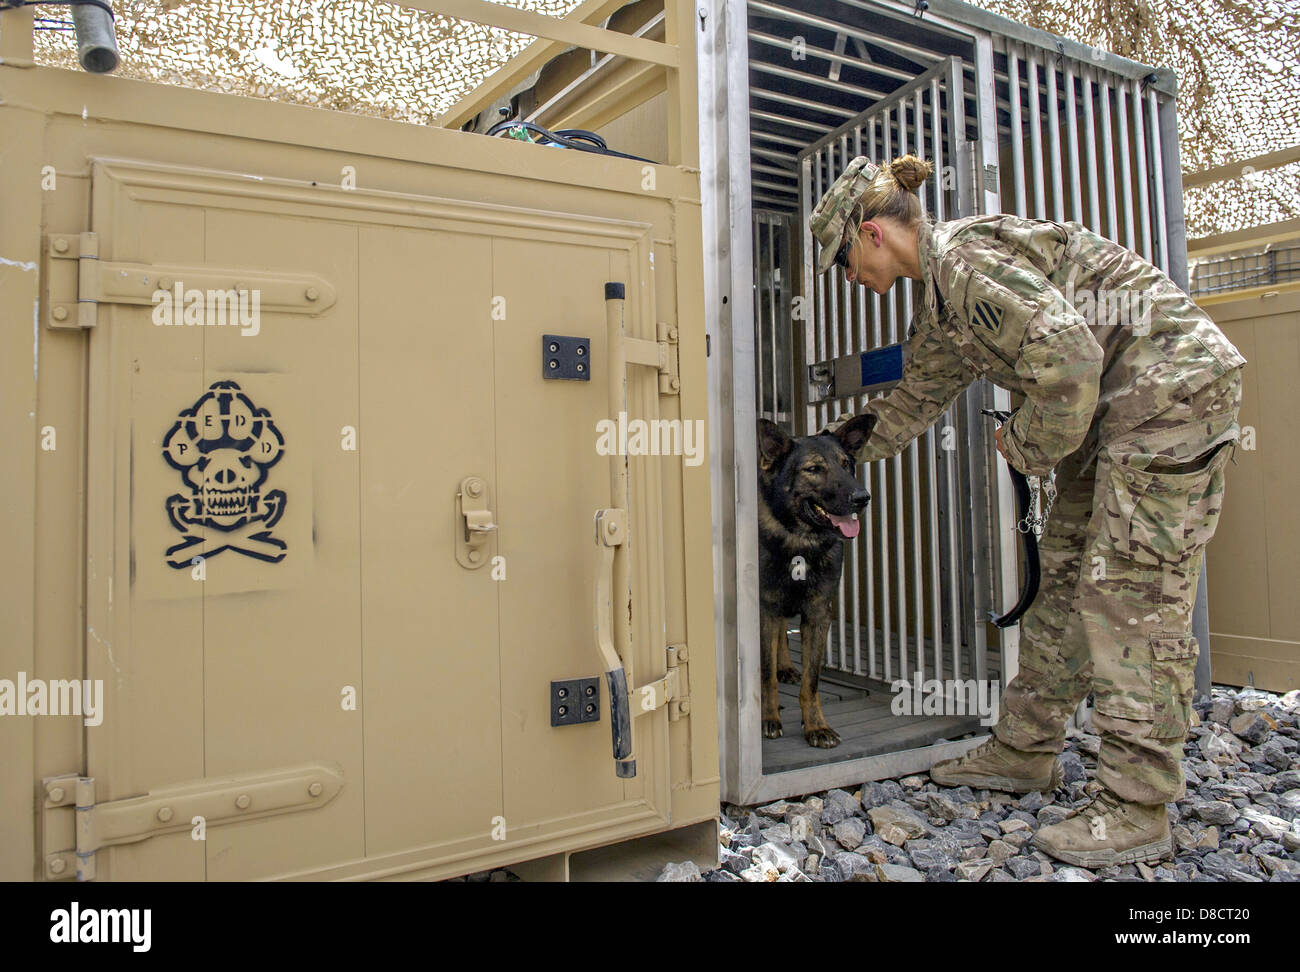 US Air Force Staff Sgt. Jessie Johnson, a military working dog handler with the 3rd Infantry Division moves her dog, Chrach to the kennel at Forward Operating Base Pasab April 24, 2013 in Kandahar province, Afghanistan. Stock Photo